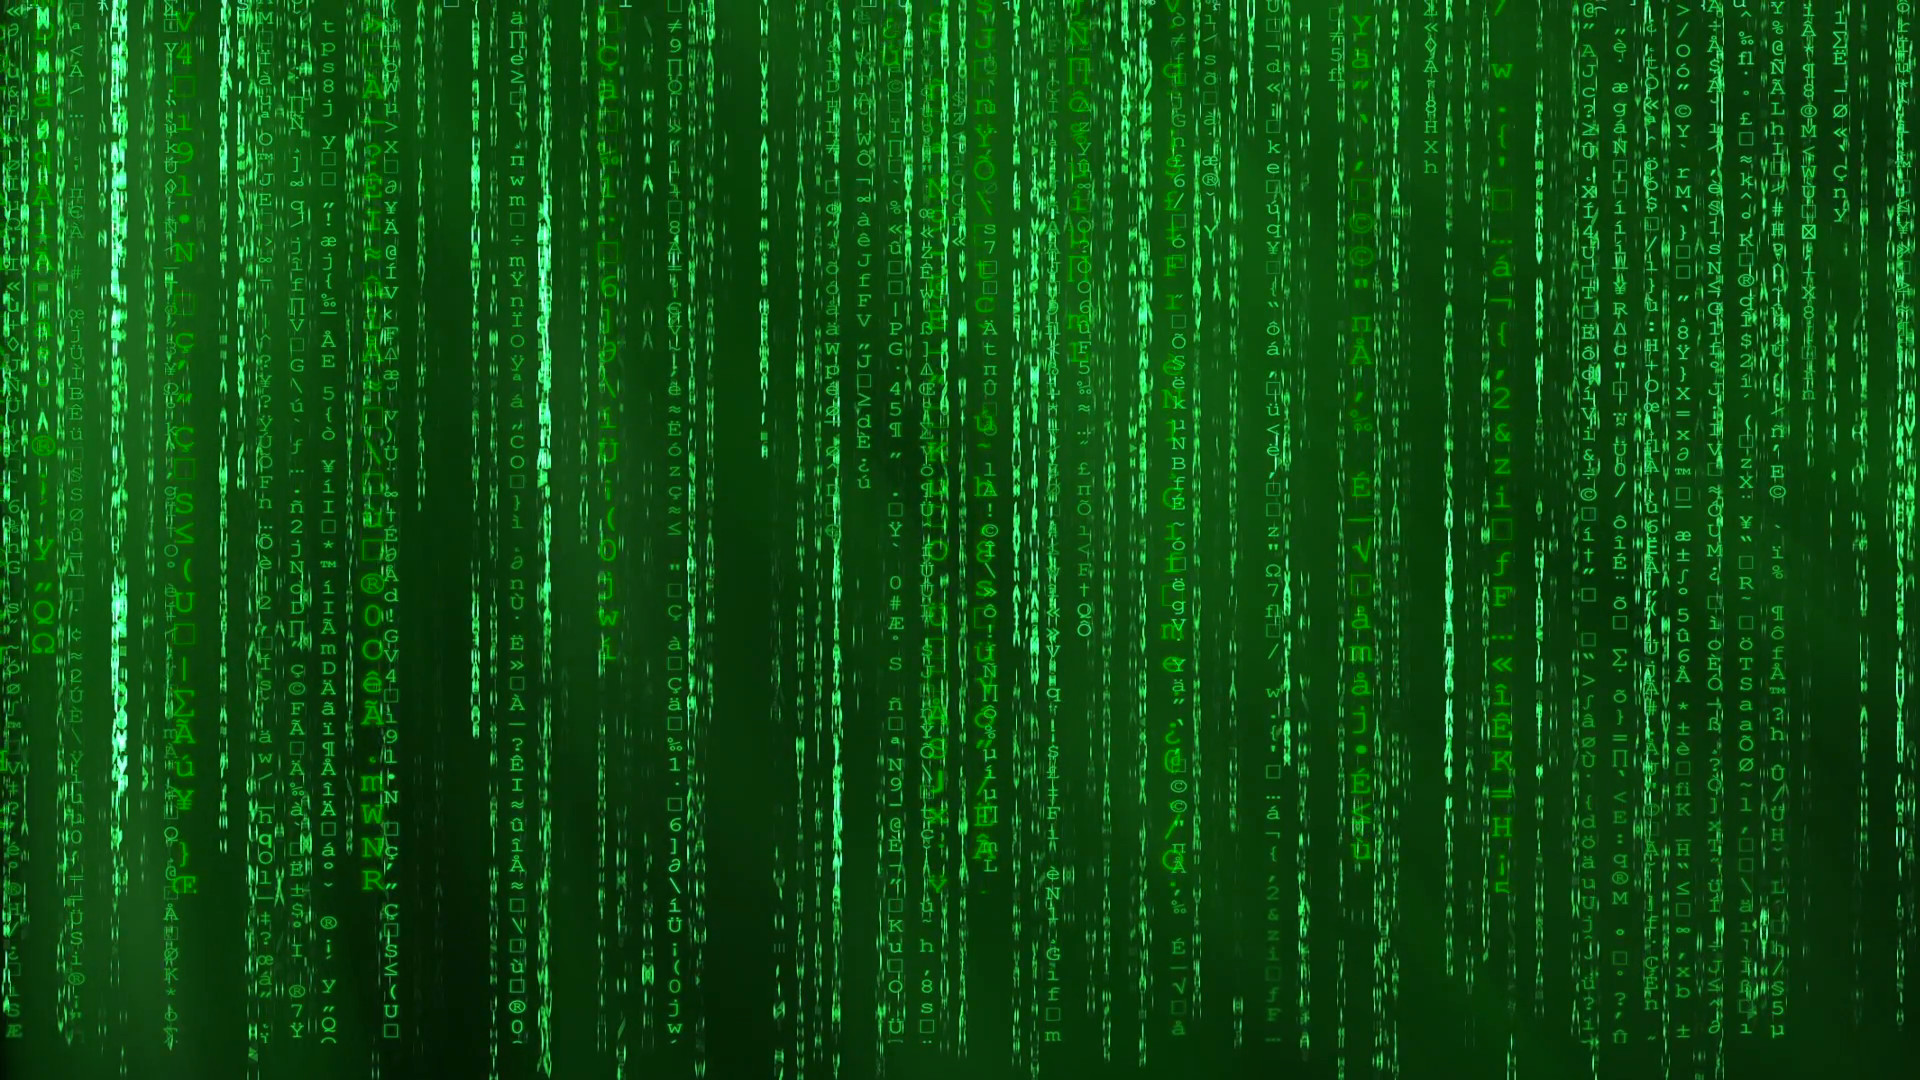 1920x1080 Green animated matrix background, computer code with symbols and characters.